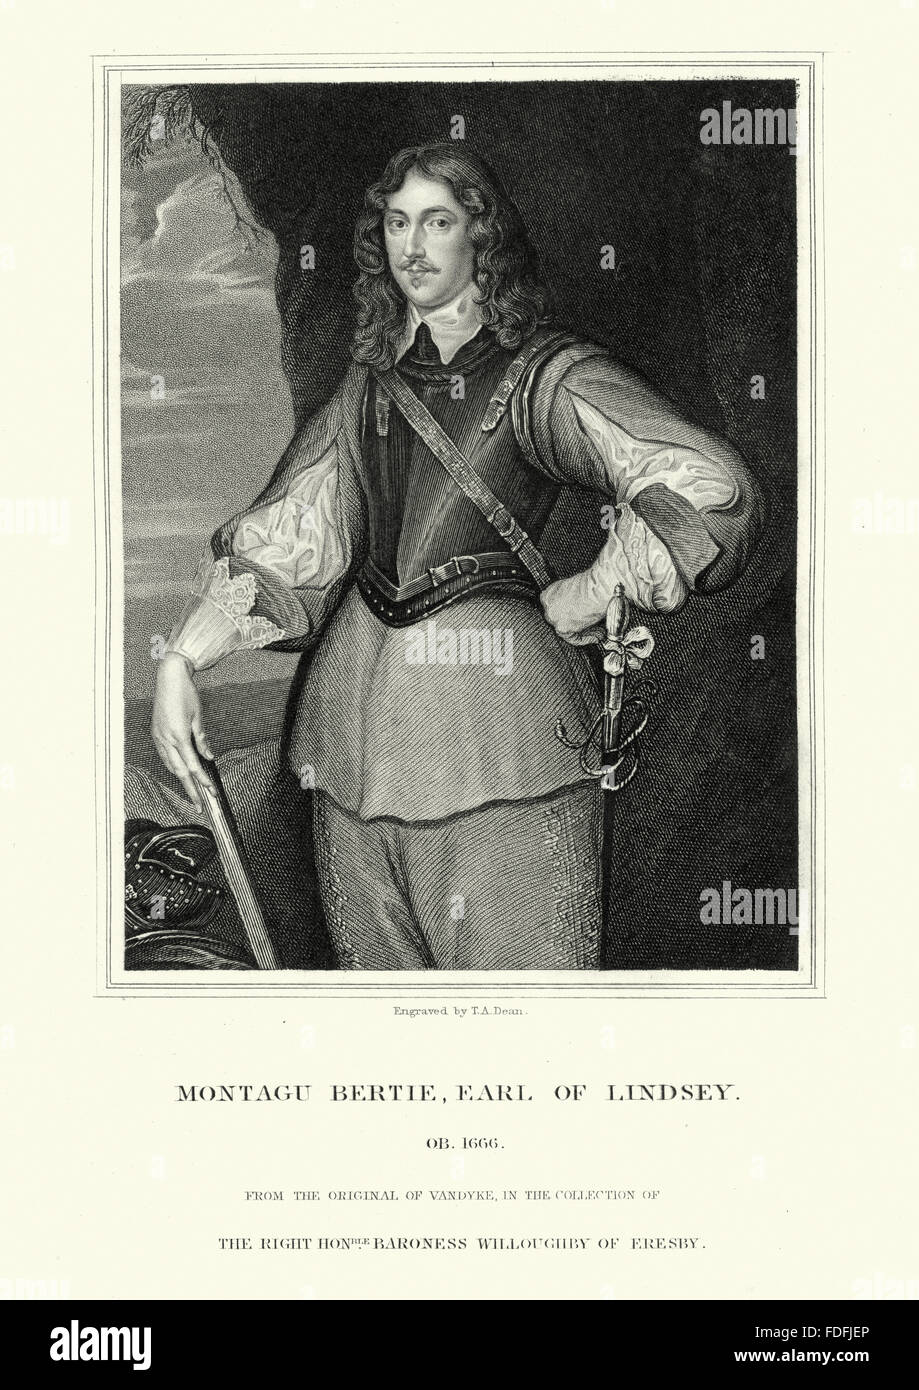 Montagu Bertie, 2nd Earl of Lindsey, an English soldier, courtier and politician. He fought in the Royalist army in the English Stock Photo